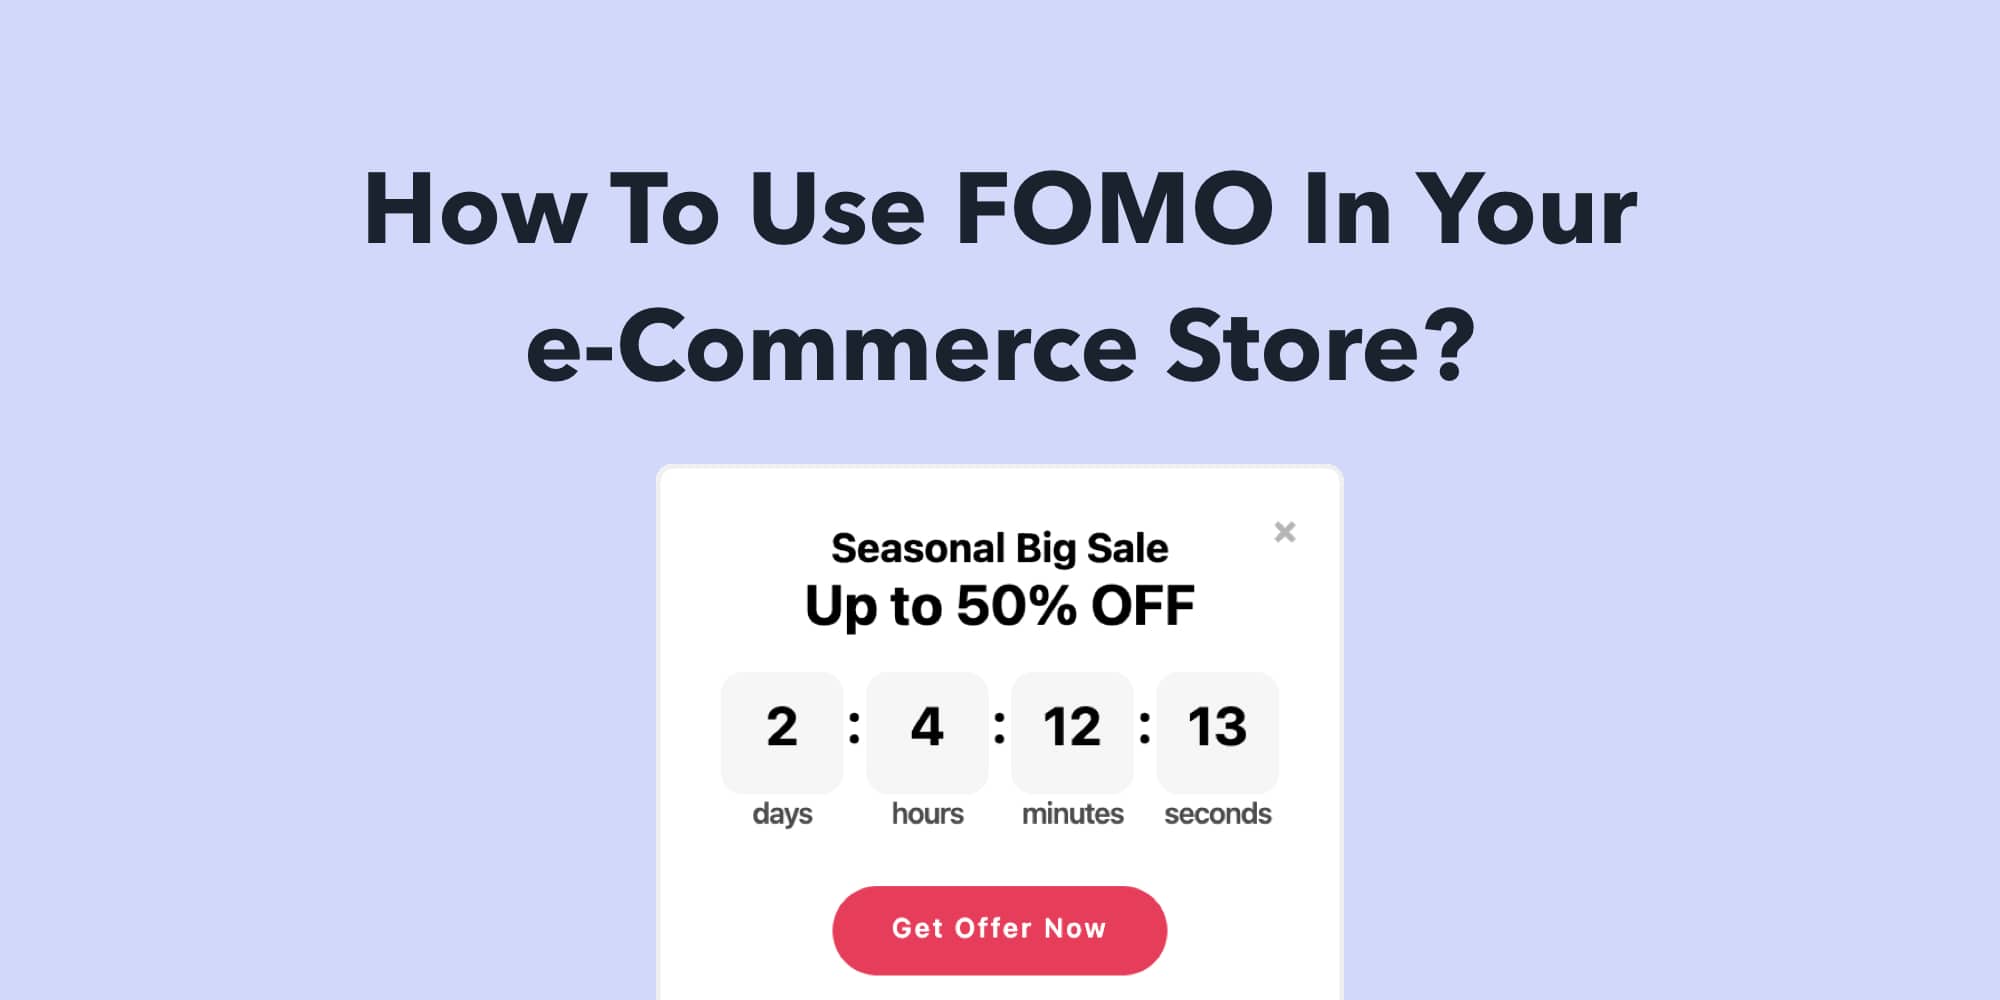 How To Use FOMO In Your e-Commerce Store?